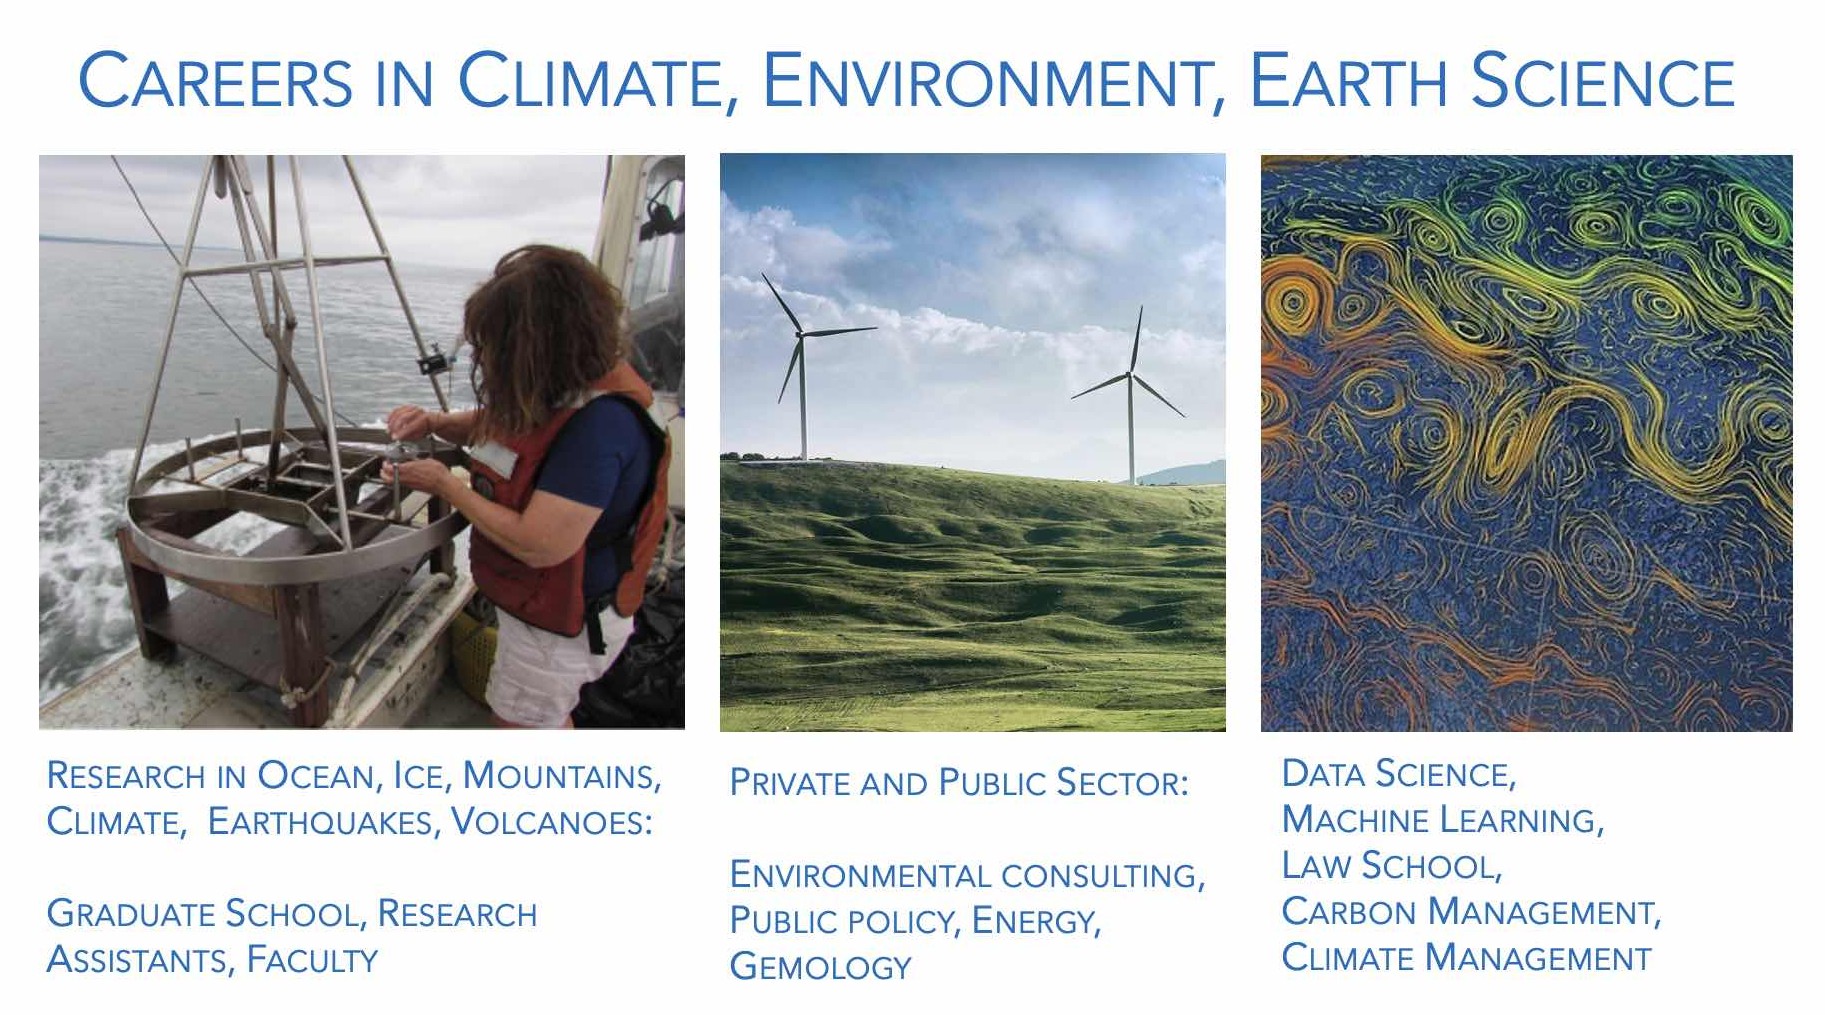 Careers in Climate, Environment, Earth Science